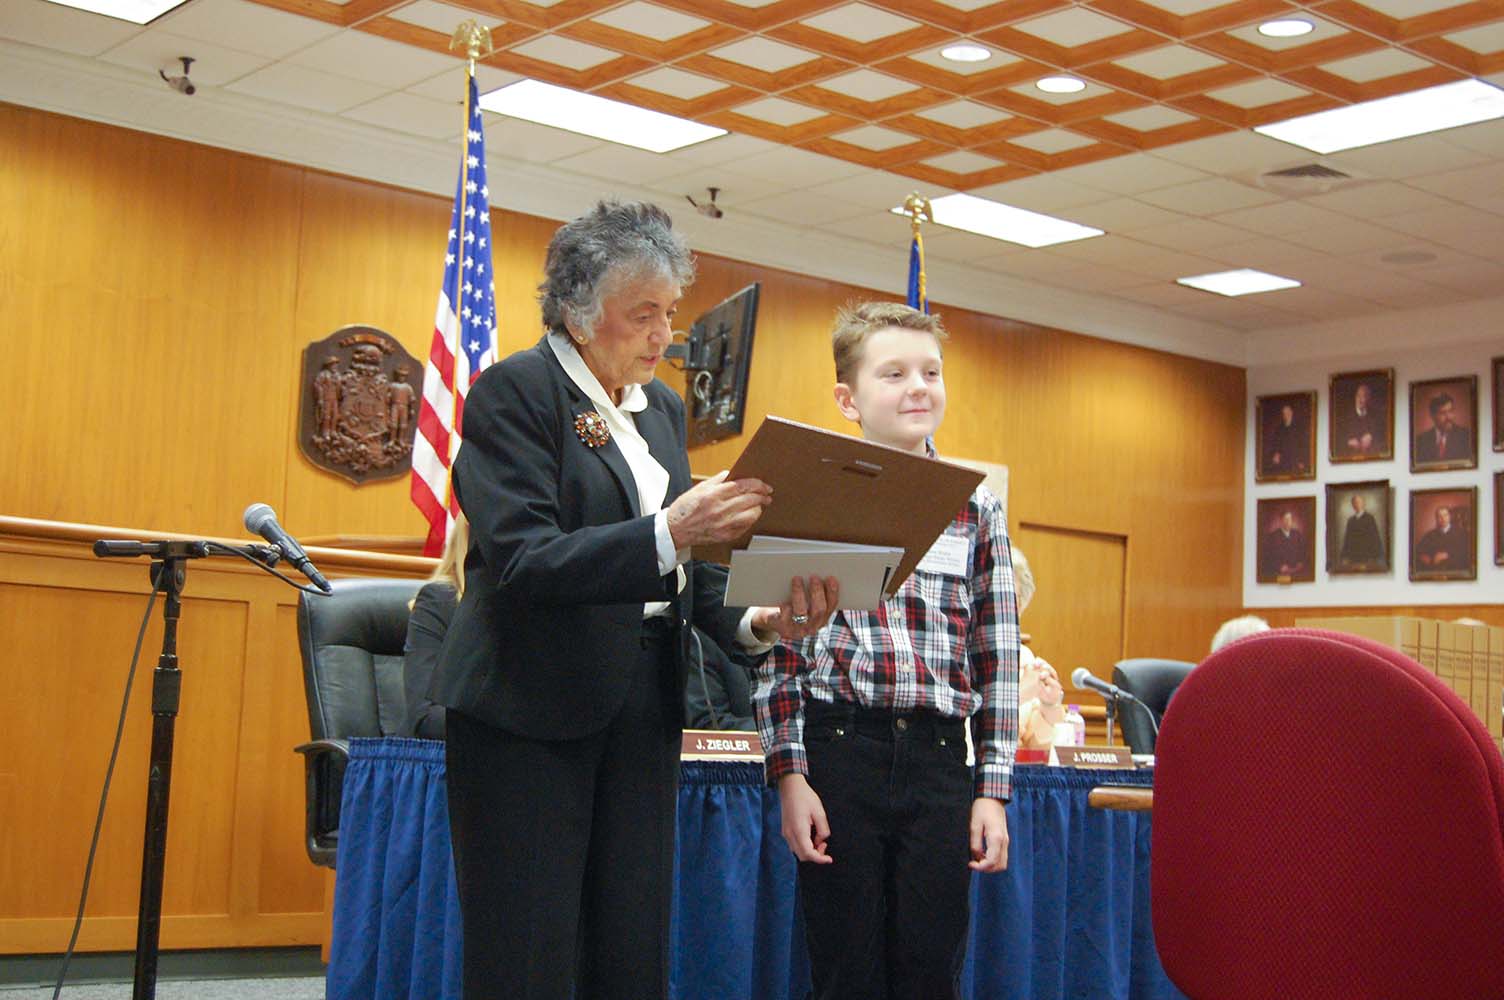 Chief Justice Abrahamson presenting an award to a child